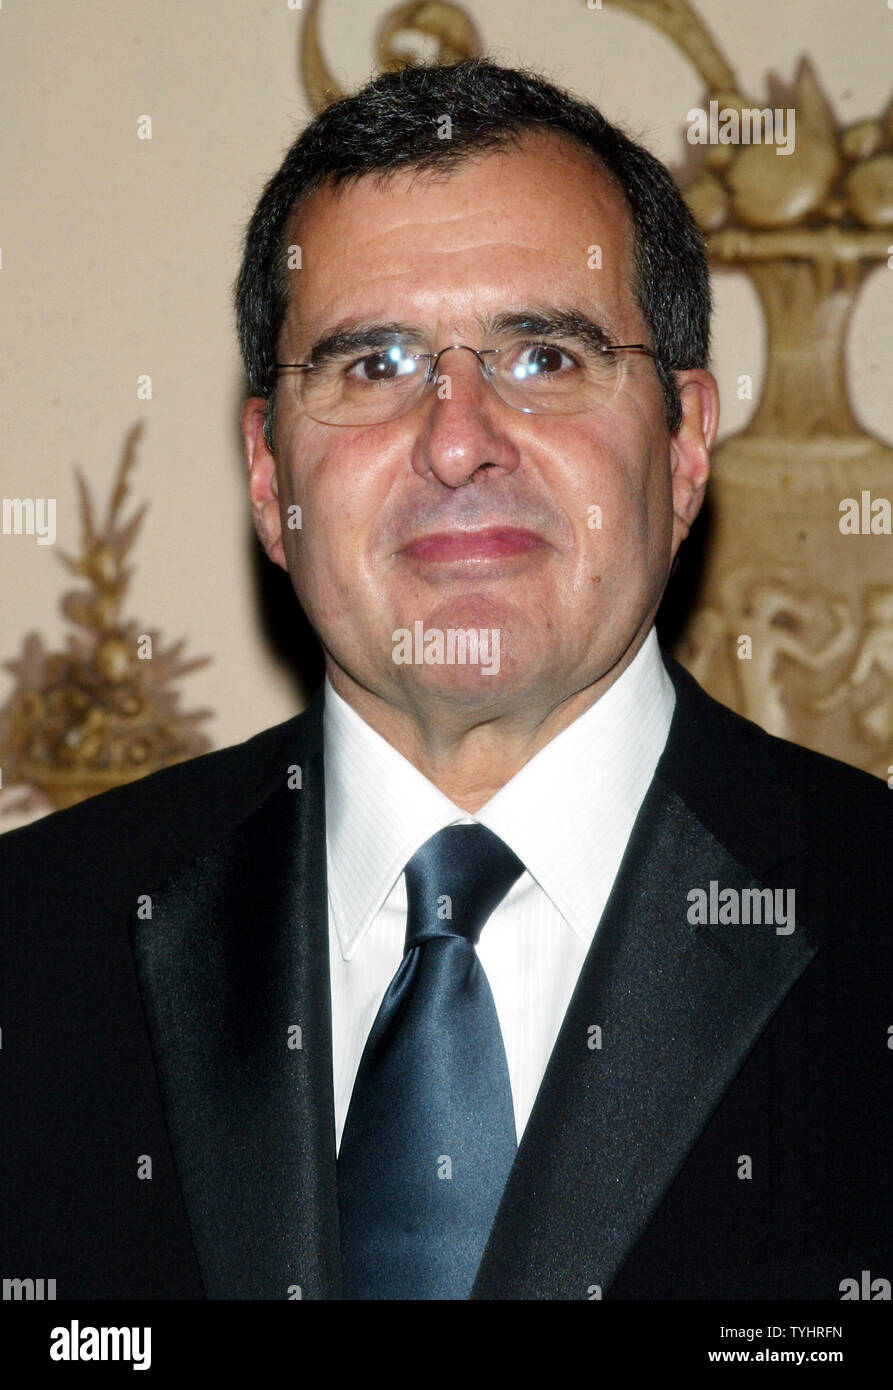 Peter Chernin, President and COO of News Corporation and Chairman and CEO of The Fox Group, arrives for the 16th Annual Broadcasting & Cable Hall of Fame Awards Dinner at the Waldorf Astoria in New York on October 23, 2006.  (UPI Photo/Laura Cavanaugh) Stock Photo